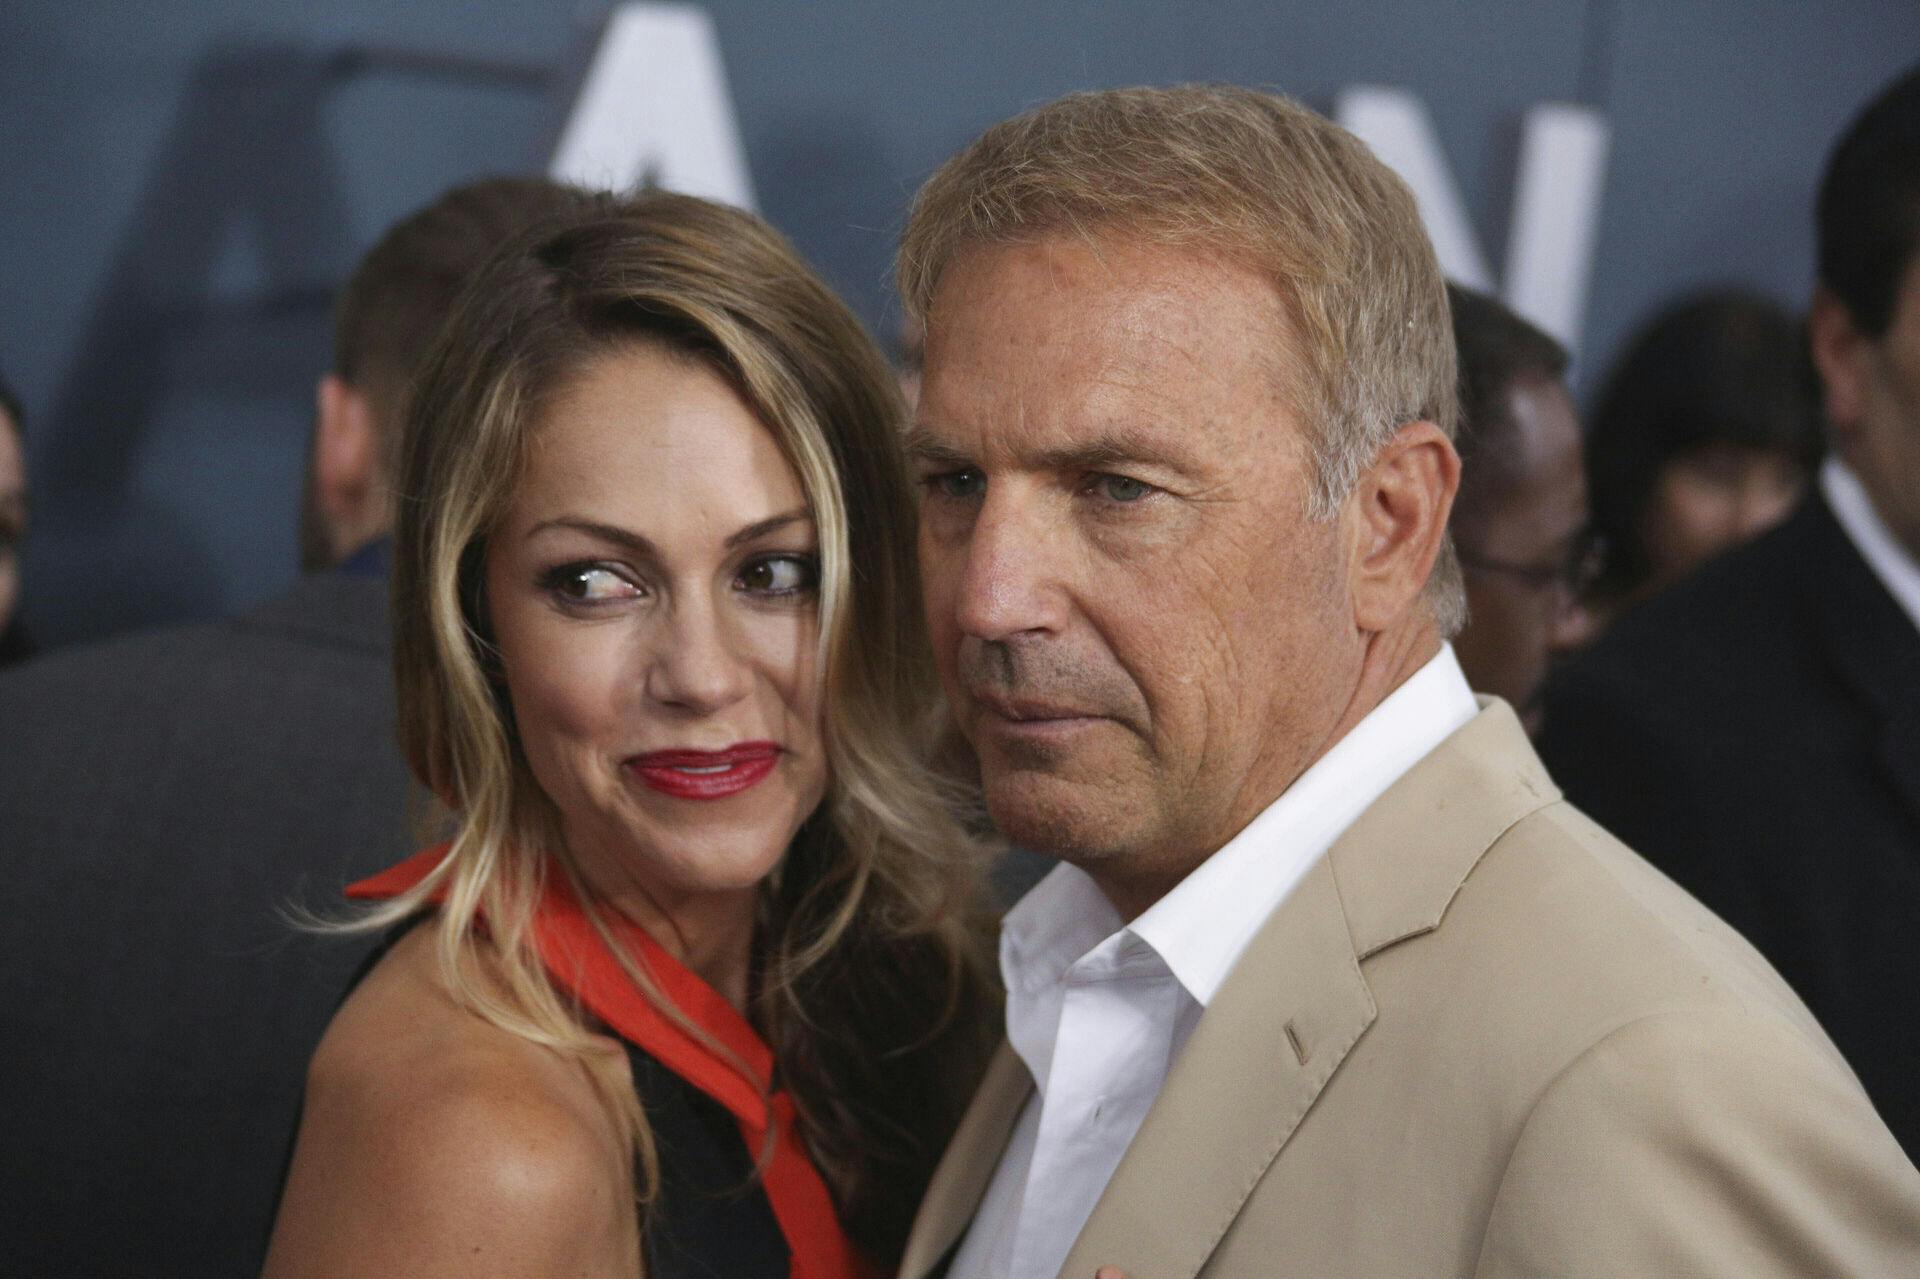 Photo by: NDZ/STAR MAX/IPx 2023 6/10/13 Actor Kevin Costner and wife Christine Baumgartner attend "Man Of Steel" World Premiere at Alice Tully Hall at Lincoln Center on June 10, 2013 in New York City.